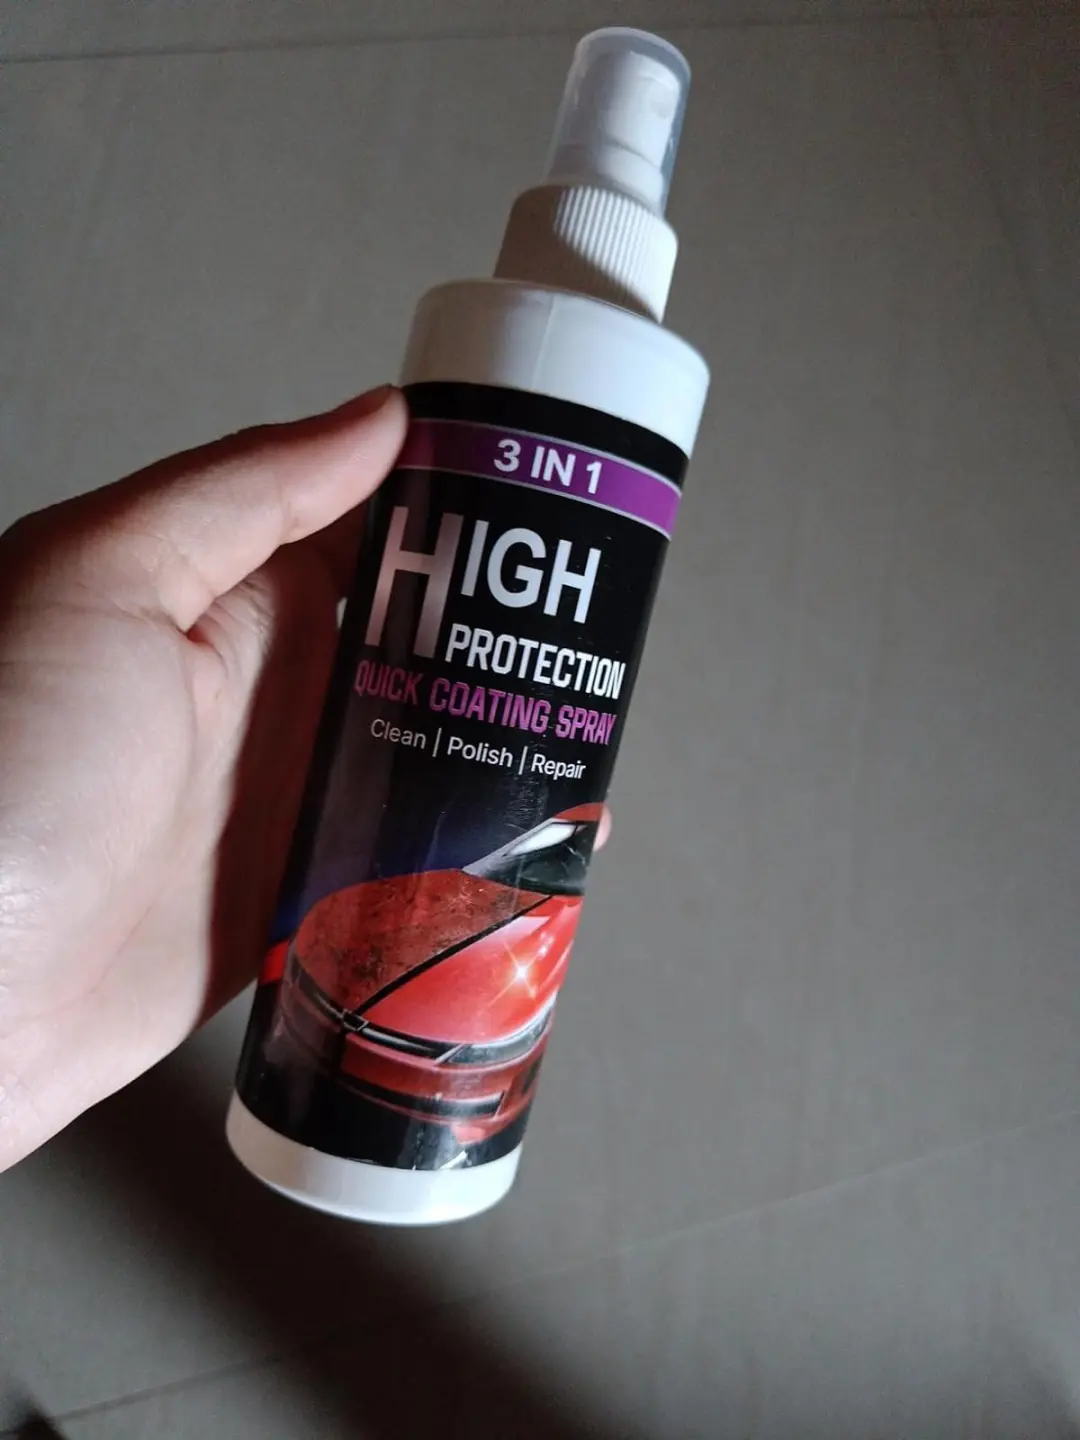 3 in 1 High Protection Quick Car Ceramic Coating Spray (BUY 1 GET